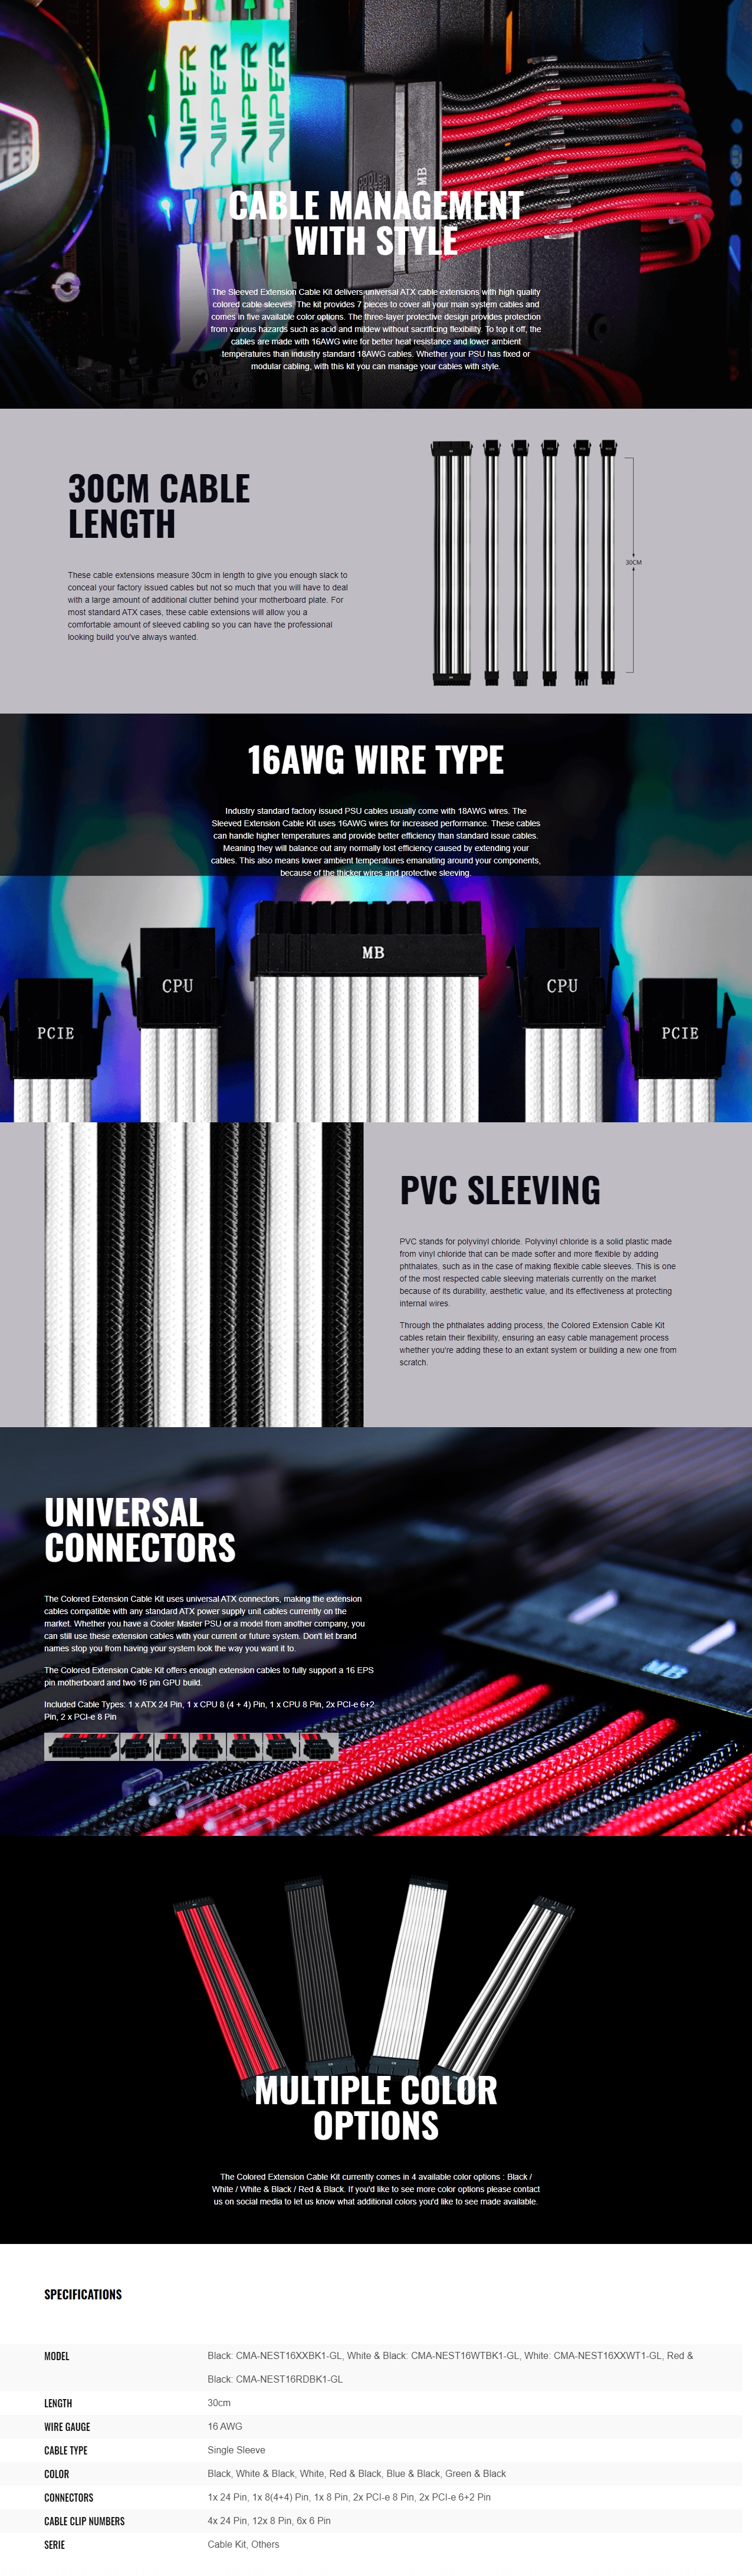 A large marketing image providing additional information about the product Cooler Master White/Black Sleeved ATX Extension Cable Kit - Additional alt info not provided